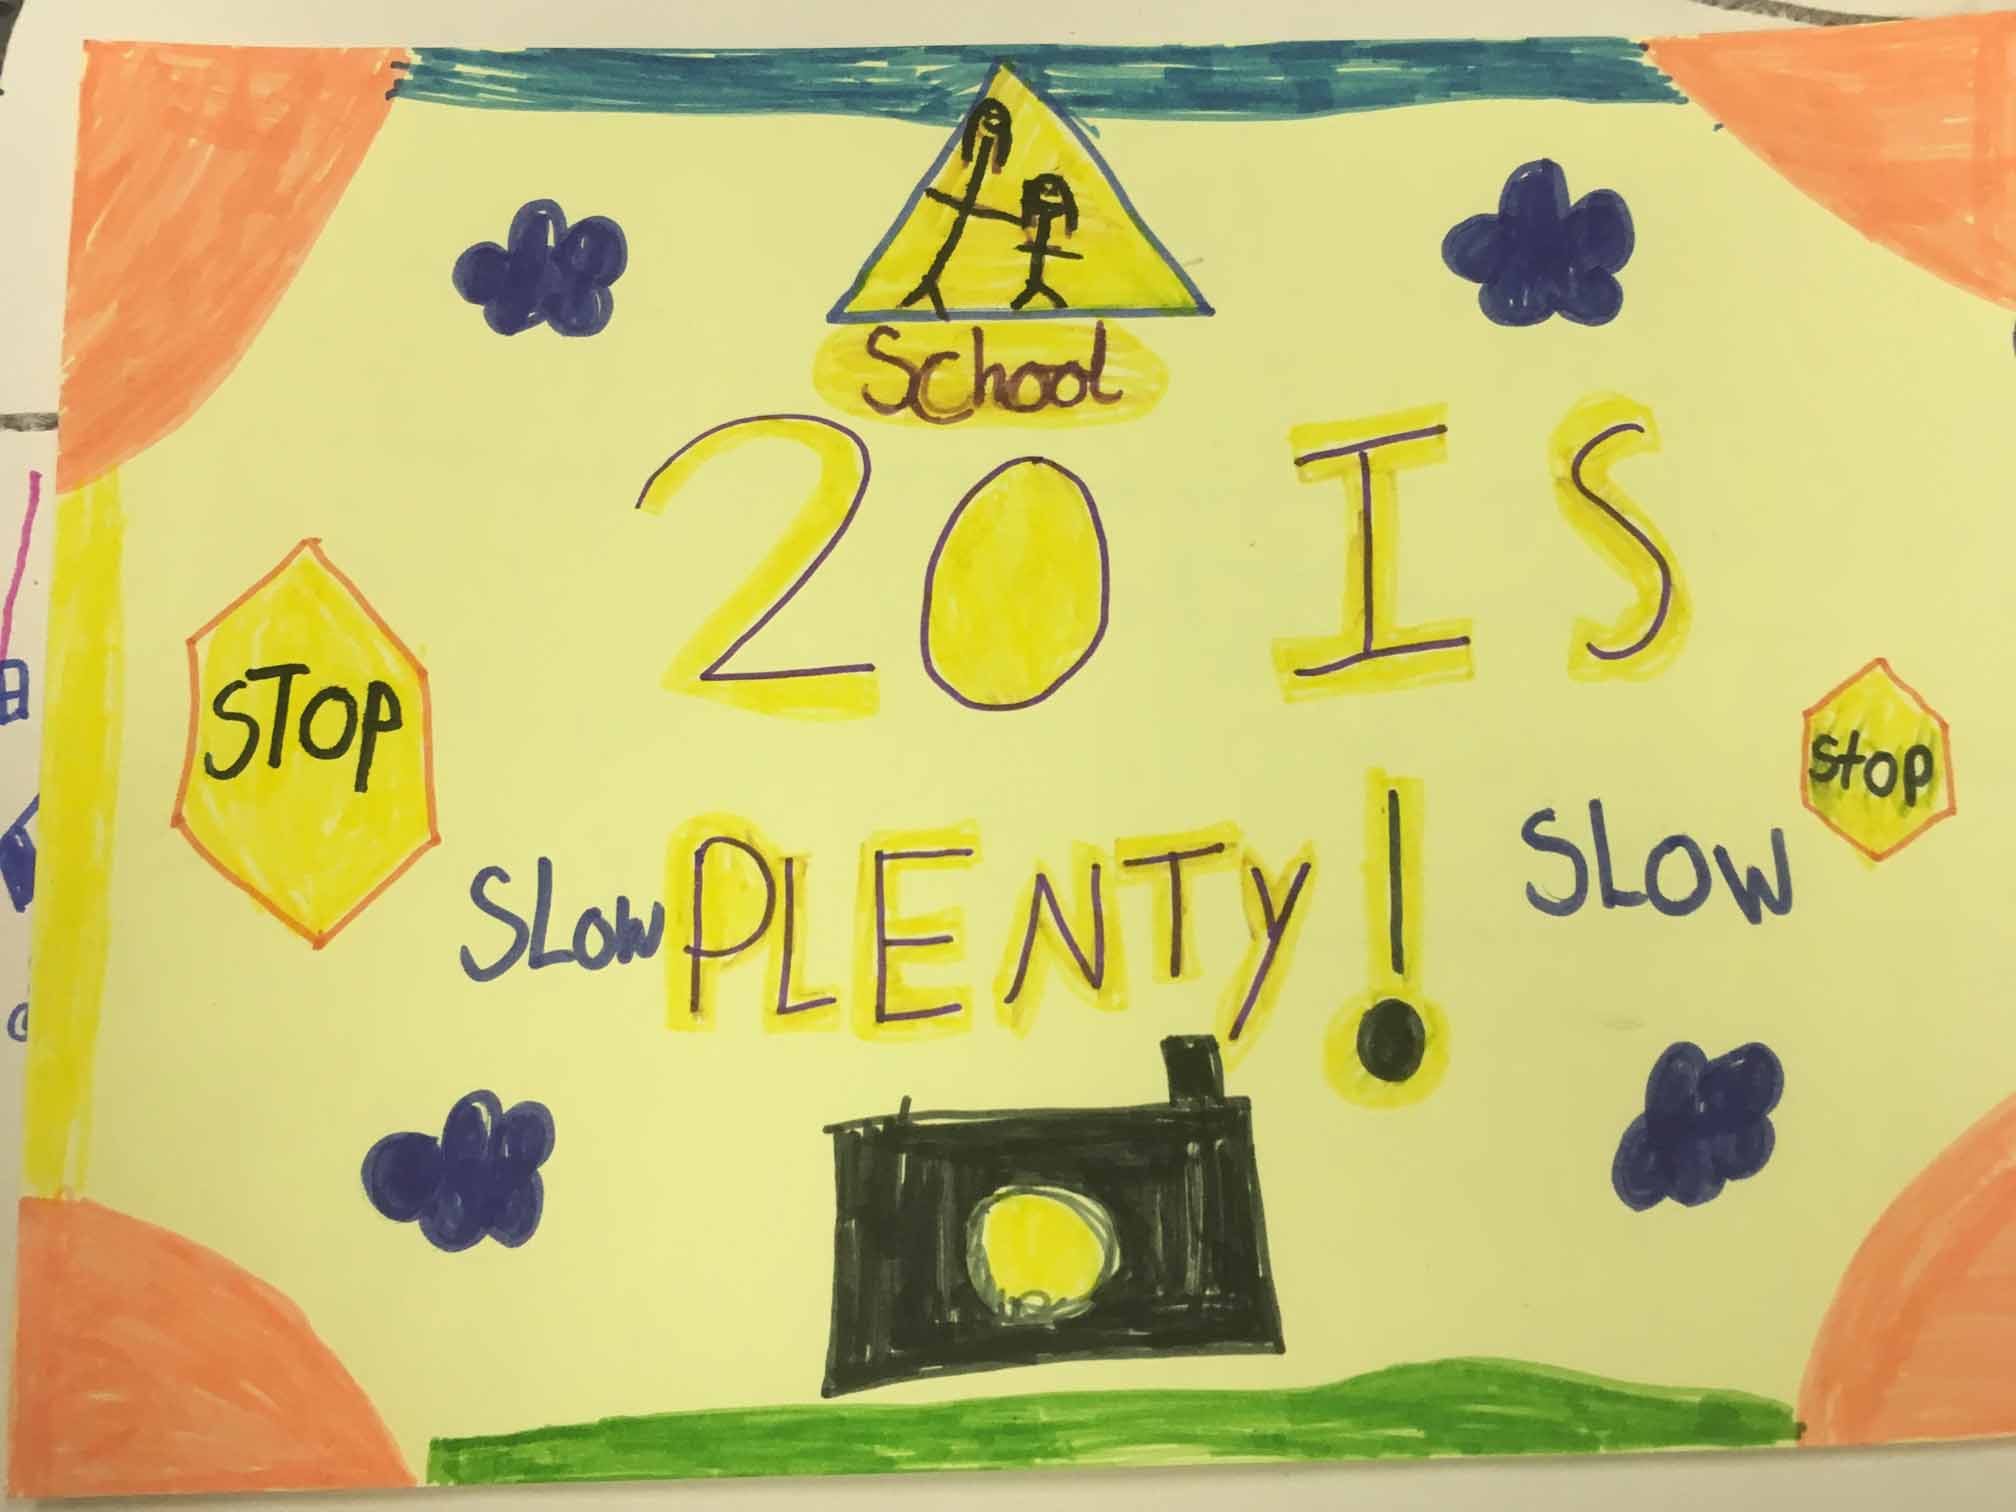 A child's drawing of a road sign reading 'School 20 is plenty!'